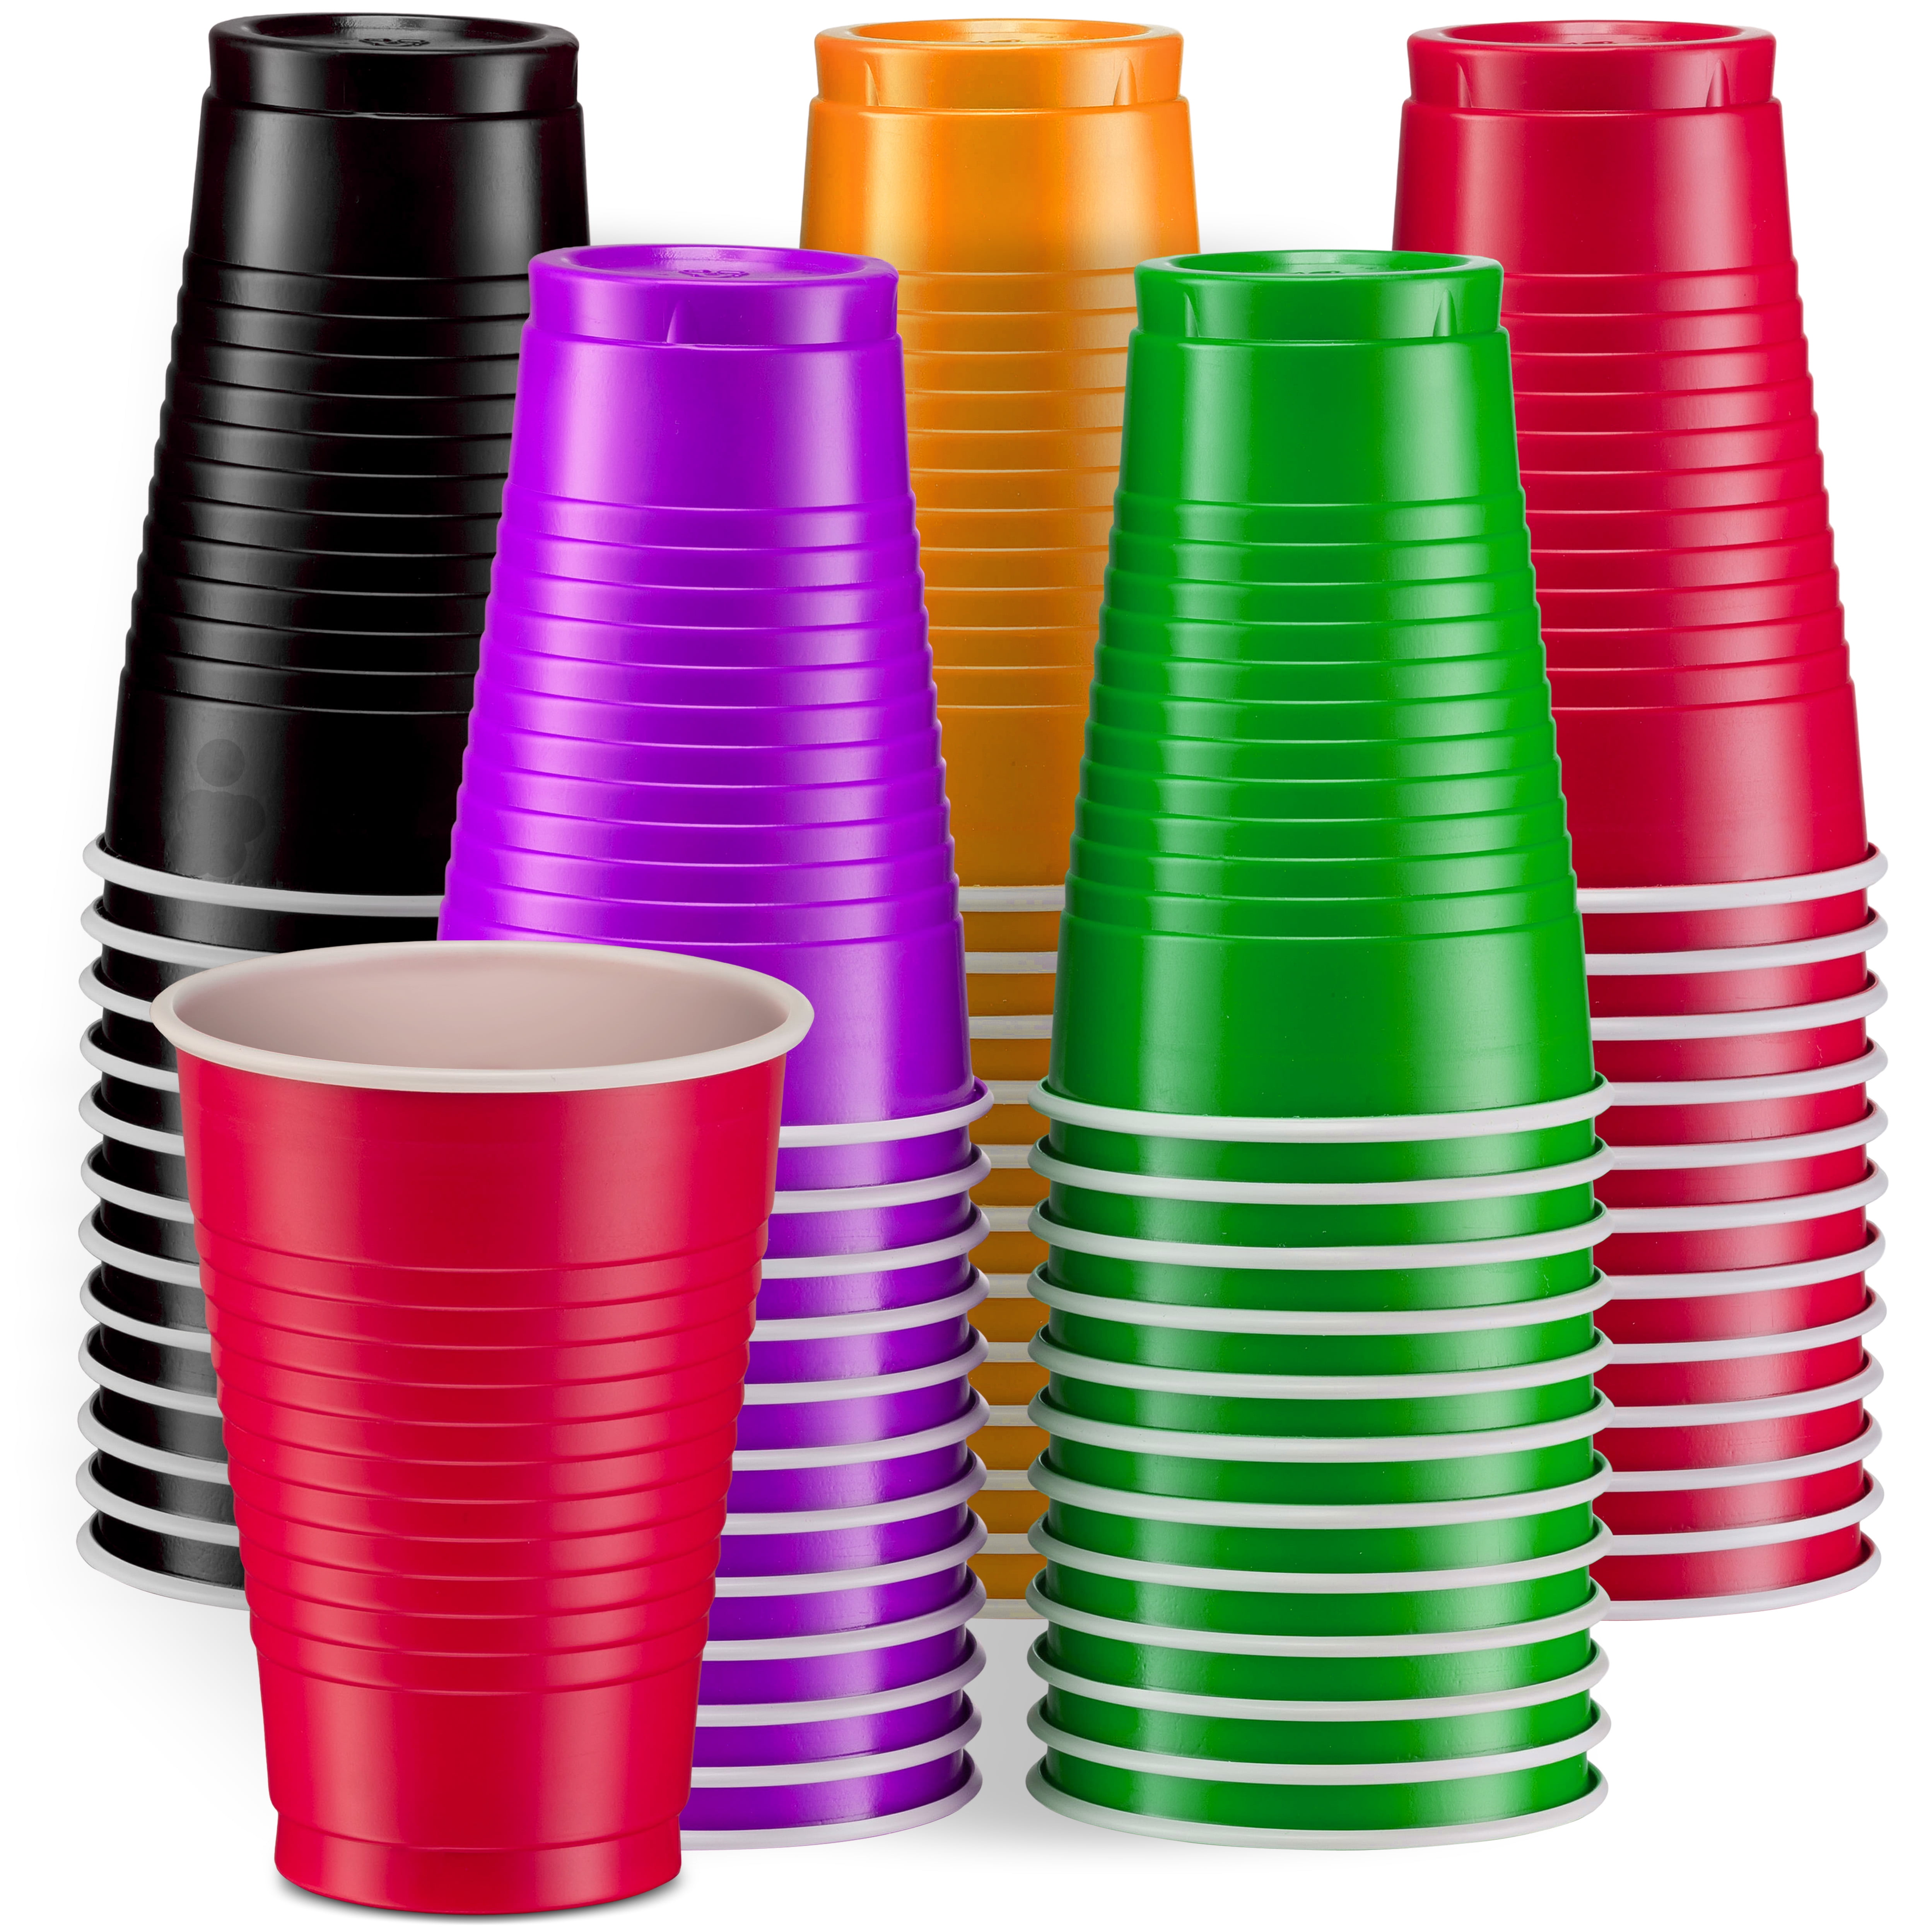 PA-2340) 12 oz Plastic Cups, 50 Count, Colors Red, Yellow, Blue, Gree